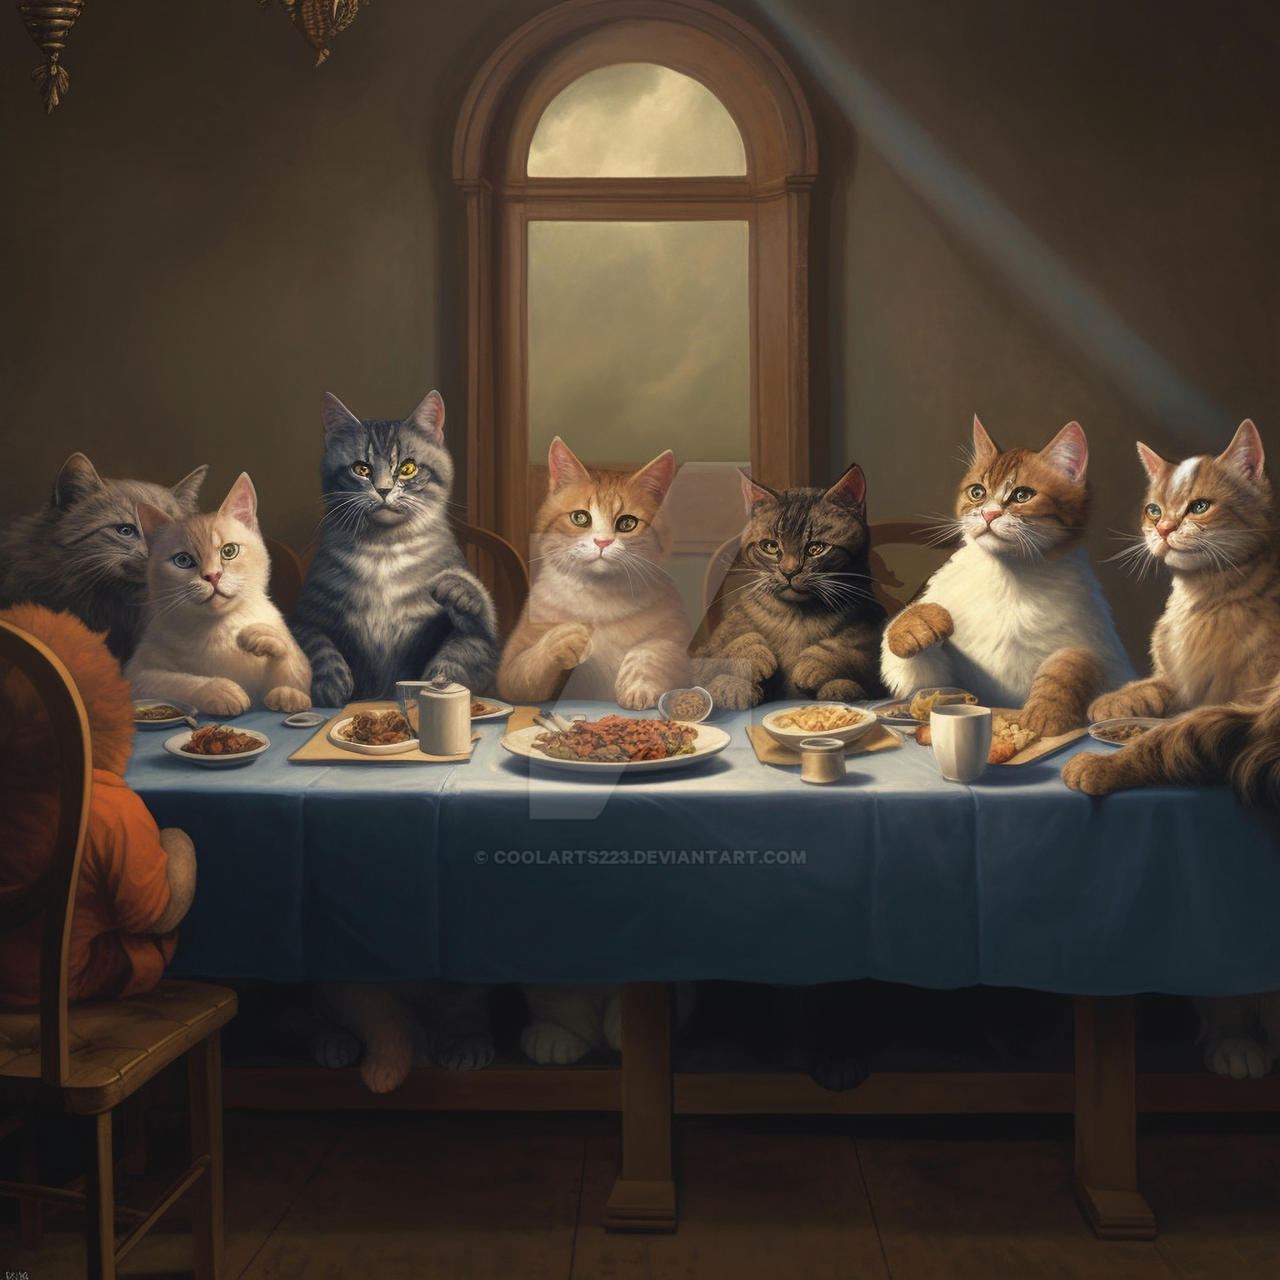 Last Supper But There Are Cats By Coolarts223 On Deviantart